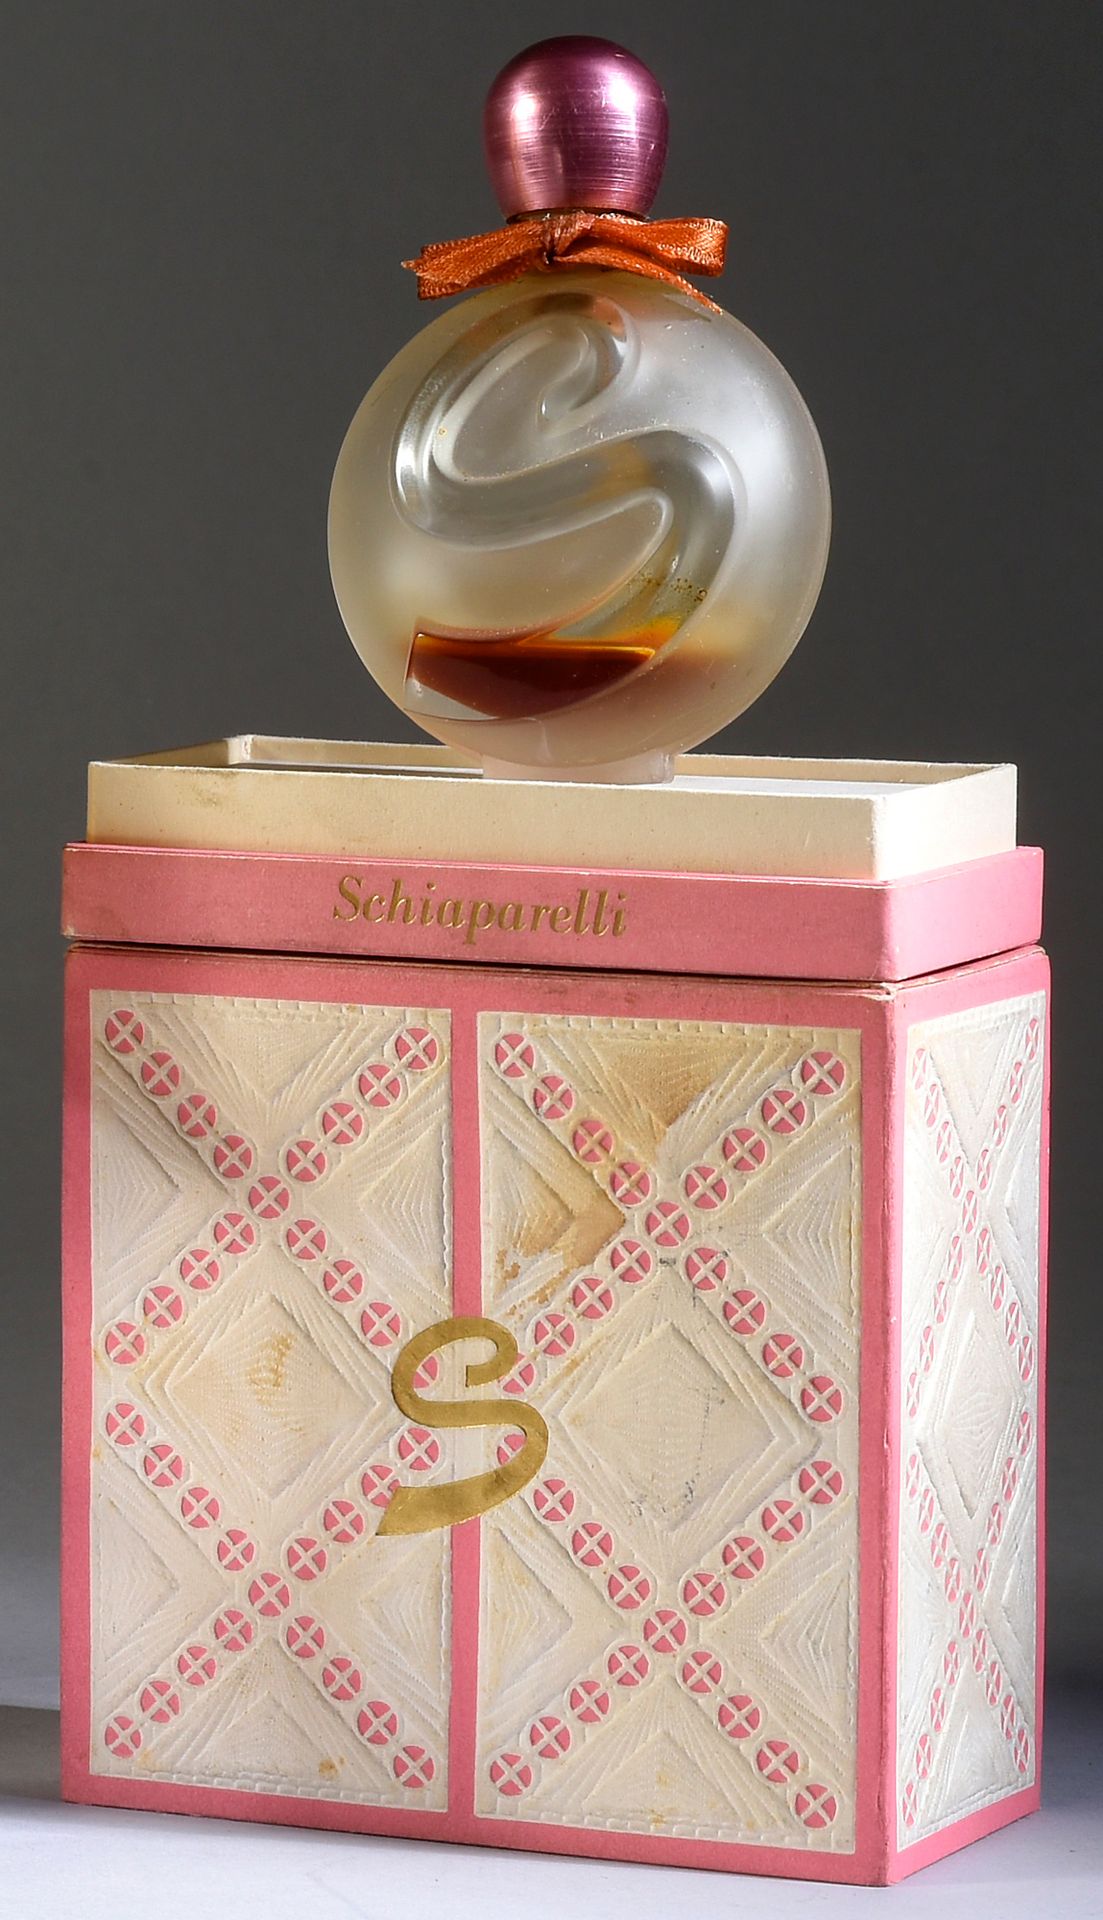 Schiaparelli - «S» - (1961) 
Presented in its cardboard box covered with pink an&hellip;